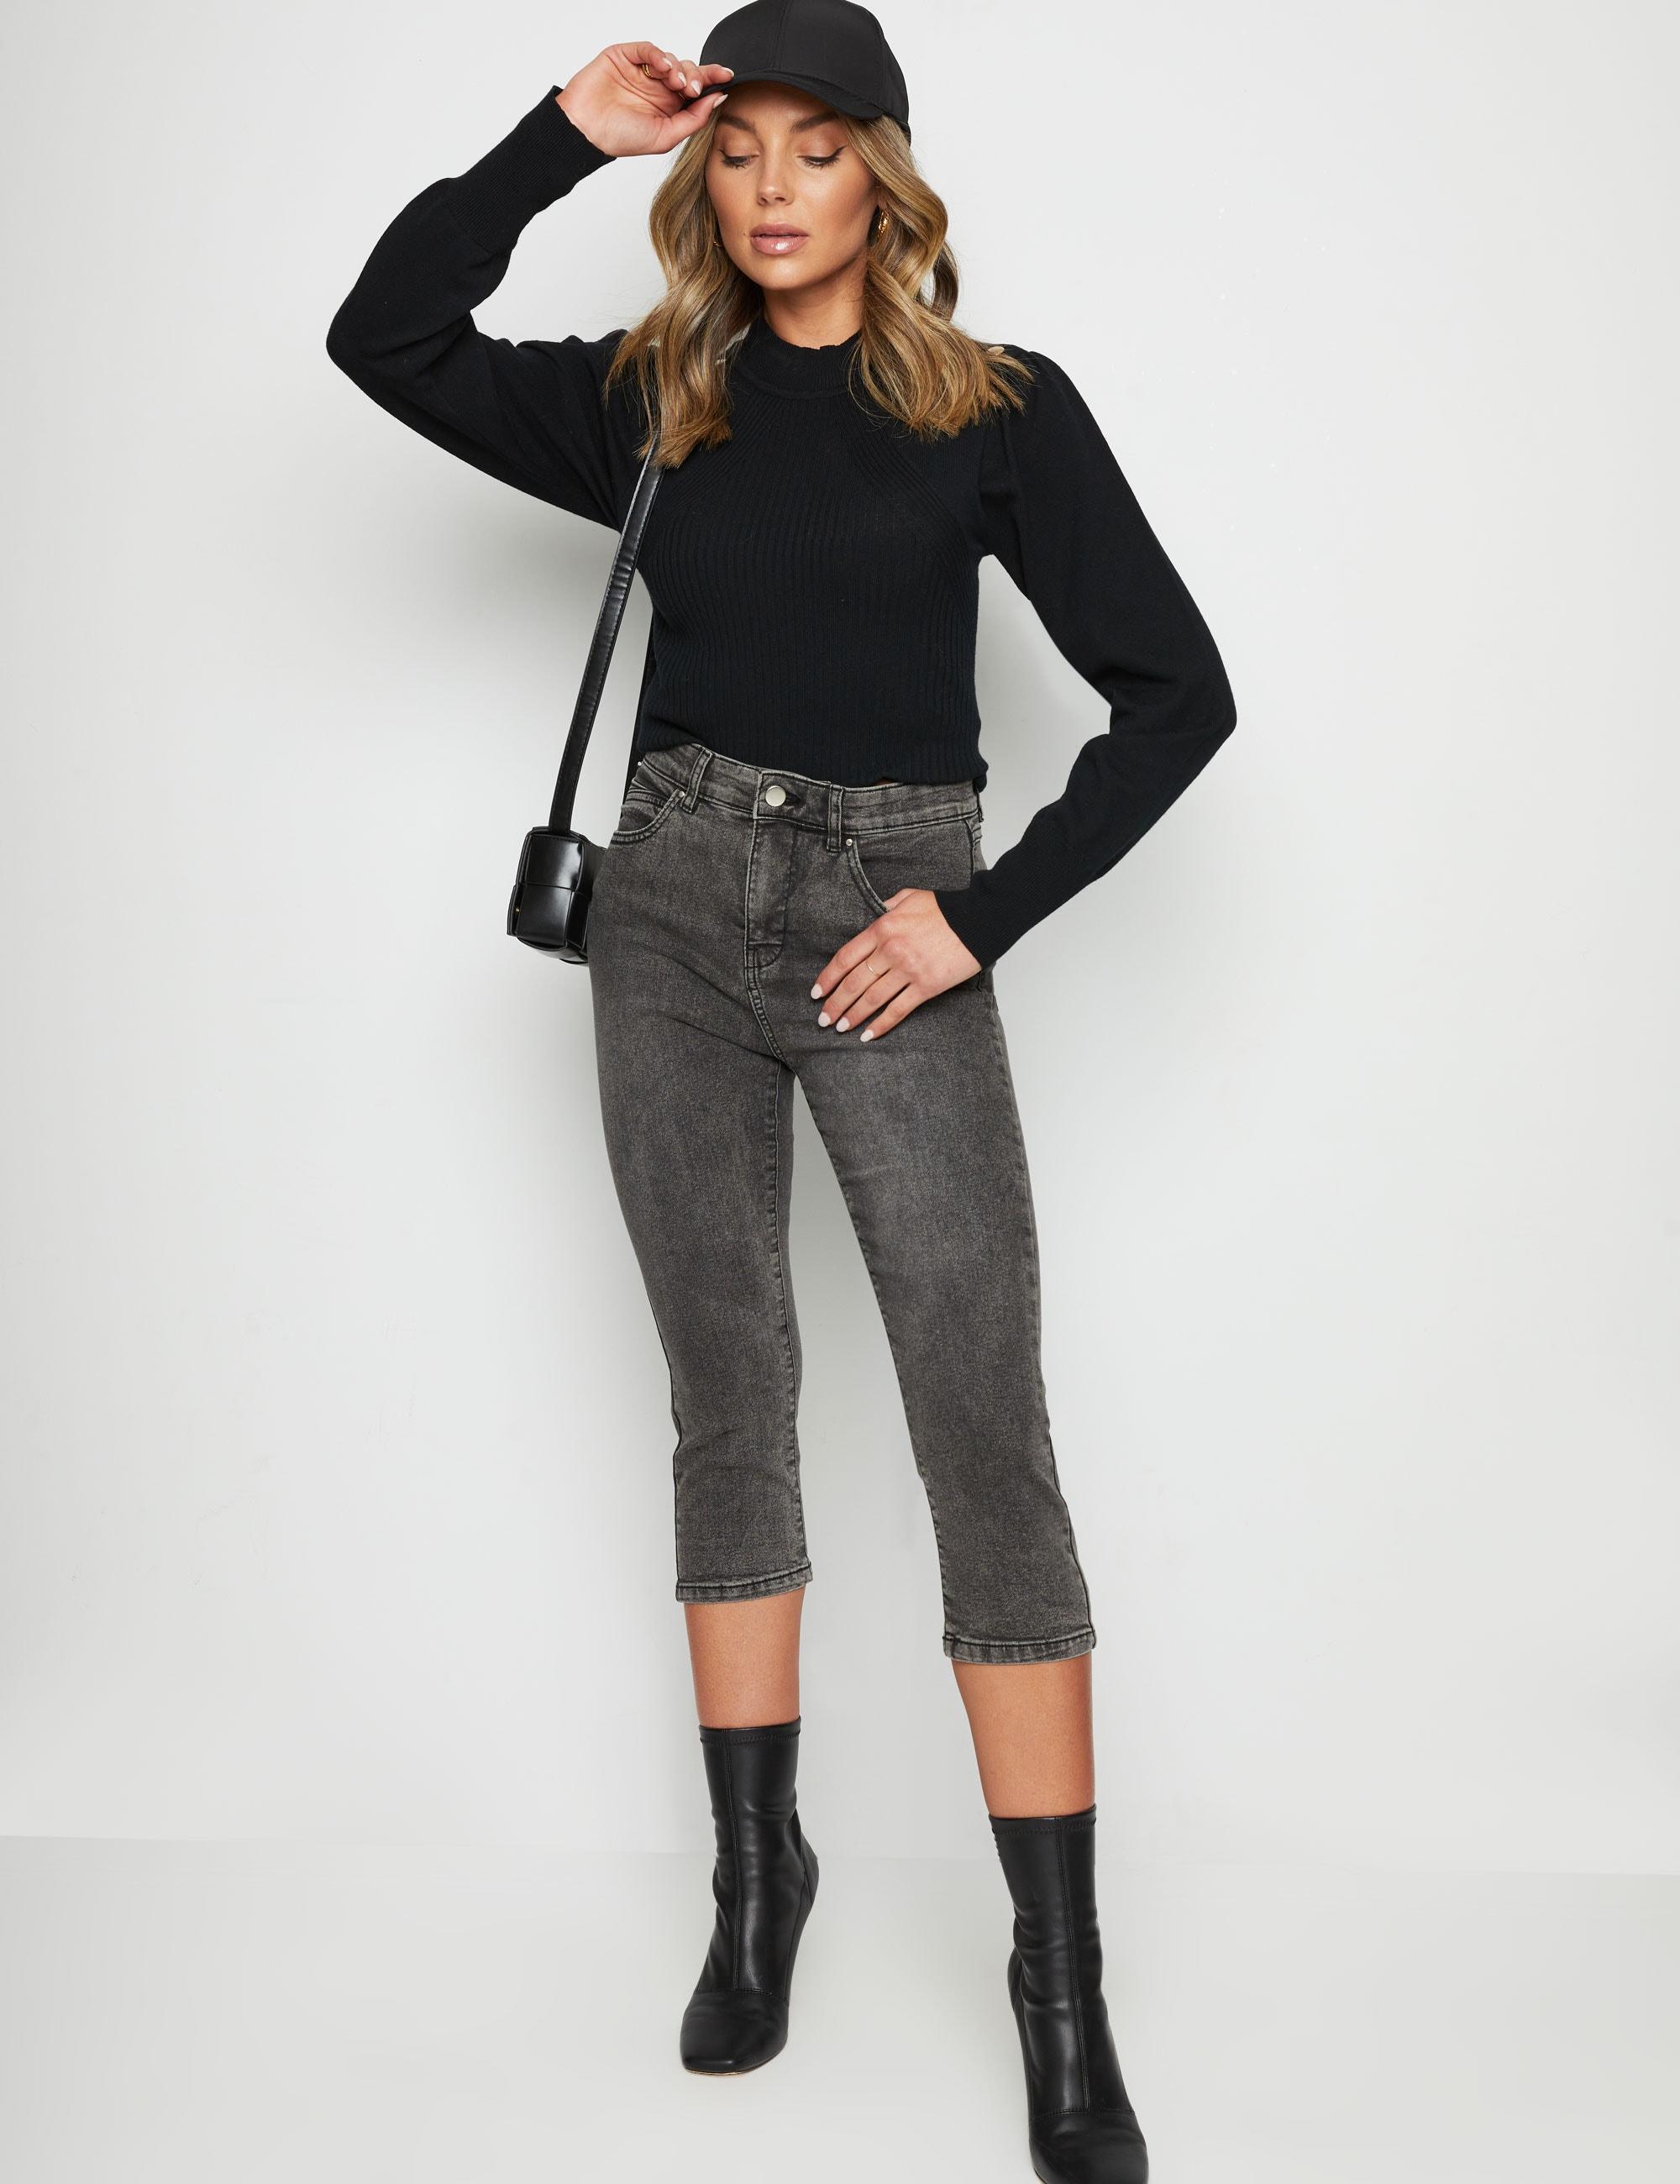 ROCKMANS - Womens Jeans - Grey Cropped - Solid Cotton Pants - Casual Fashion - All Season - Elastane - Comfort Waist - Work Clothes - Office Trousers